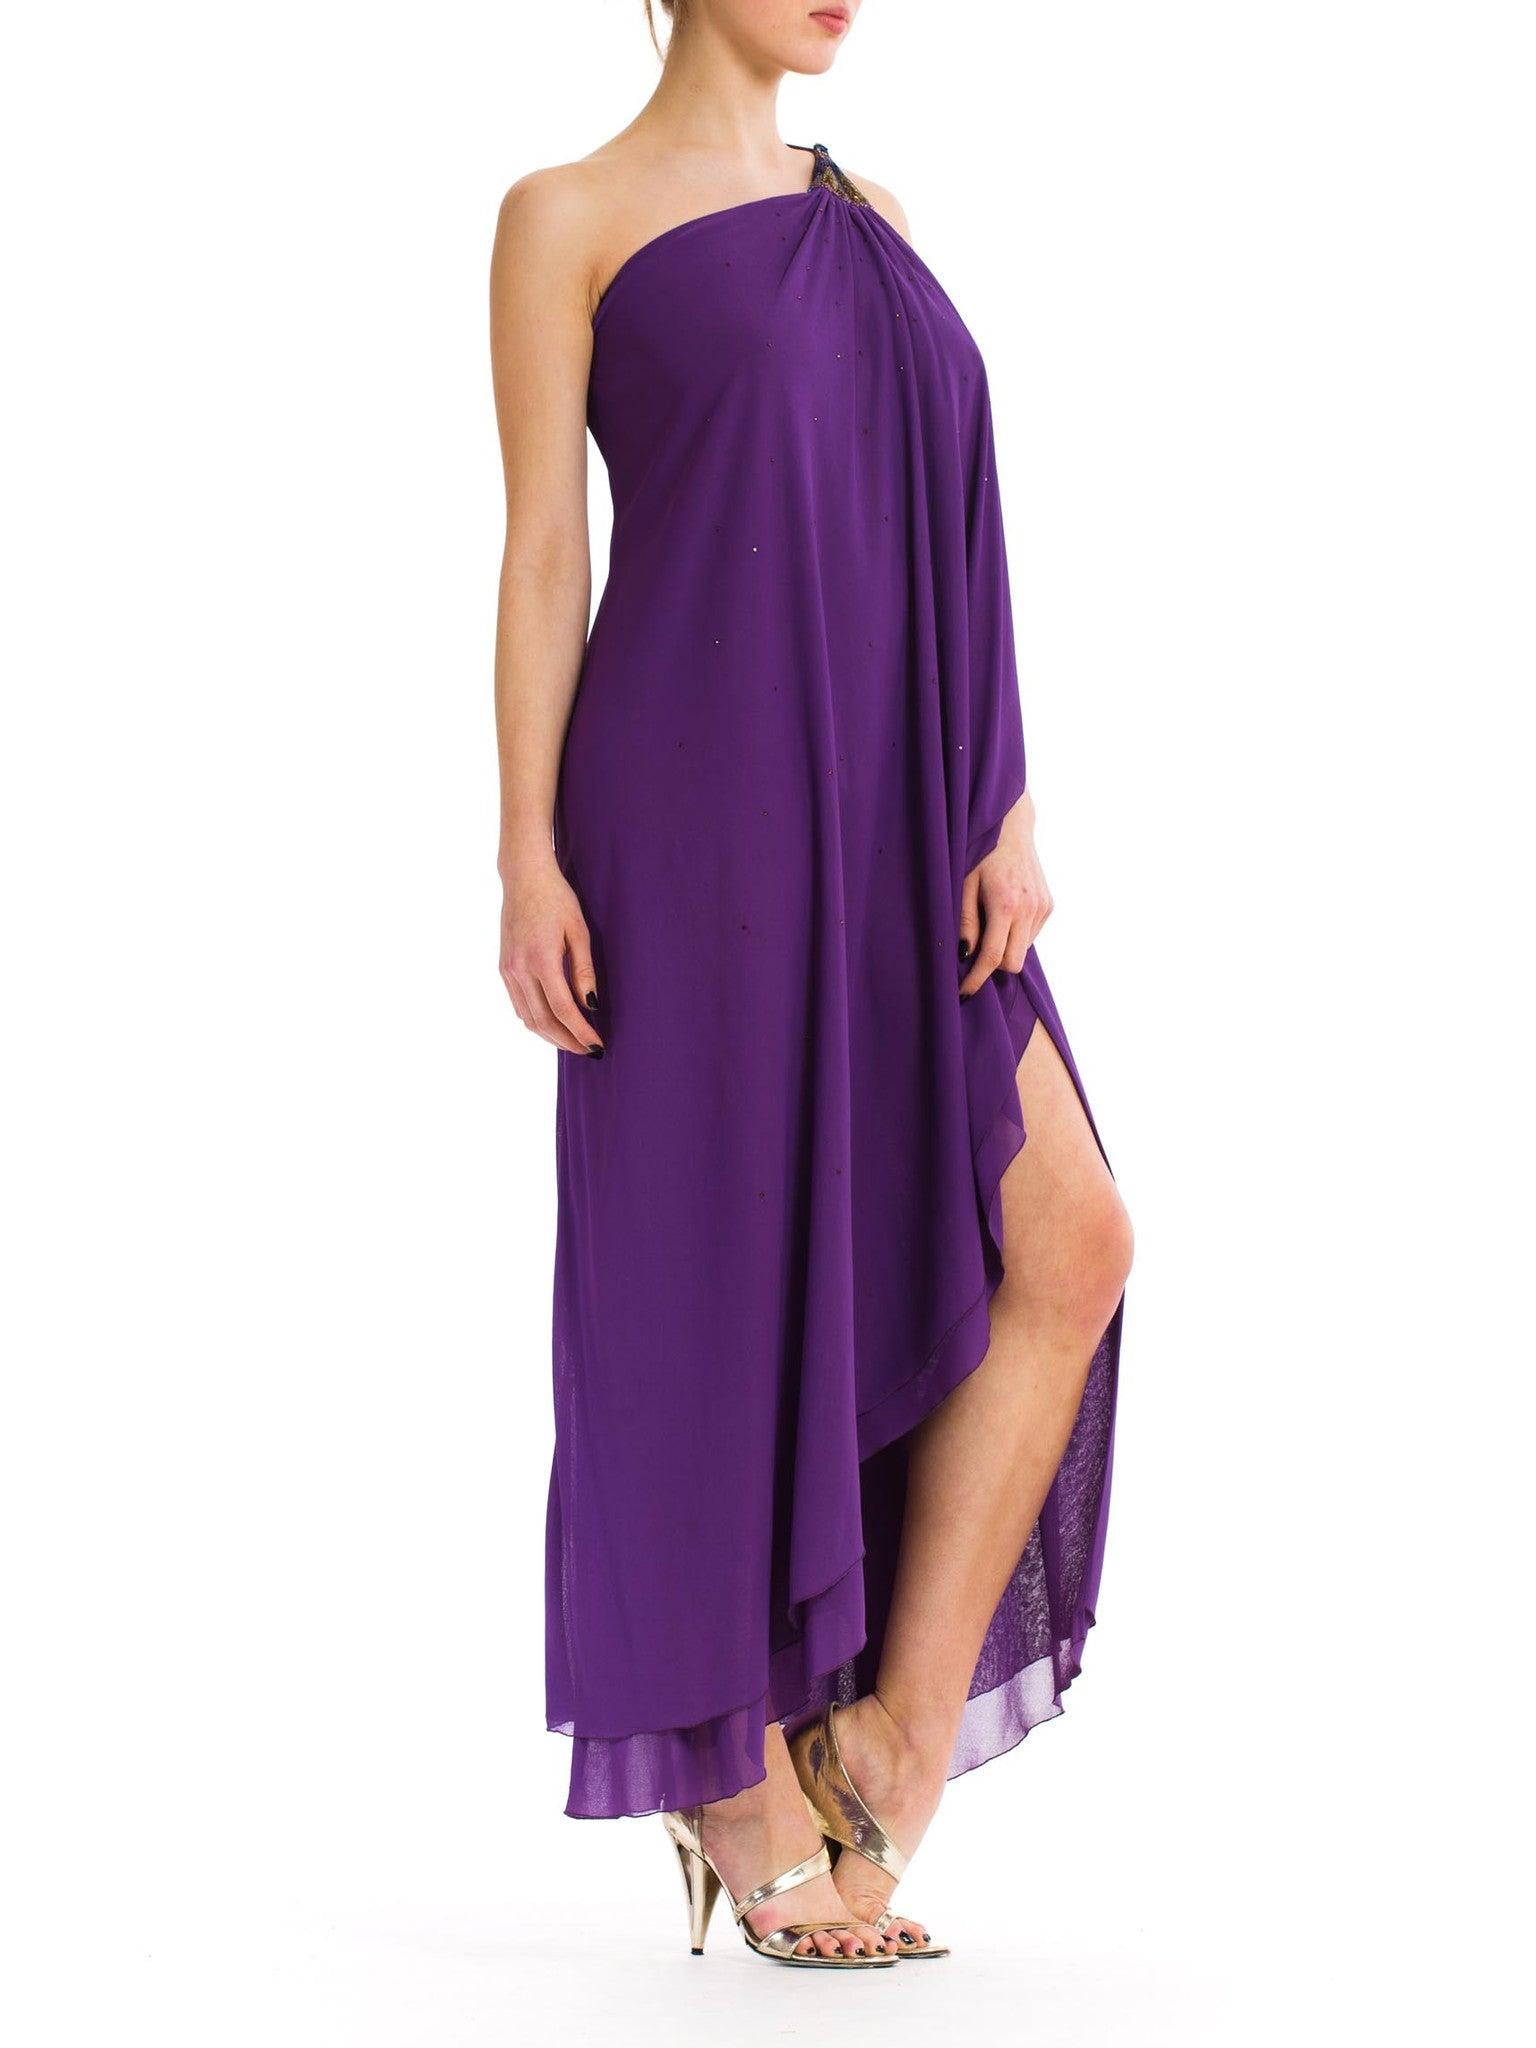 1970S JONATHAN HITCHCOCK Purple Rayon & Nylon Chiffon Jersey One Shoulder Disco In Excellent Condition For Sale In New York, NY